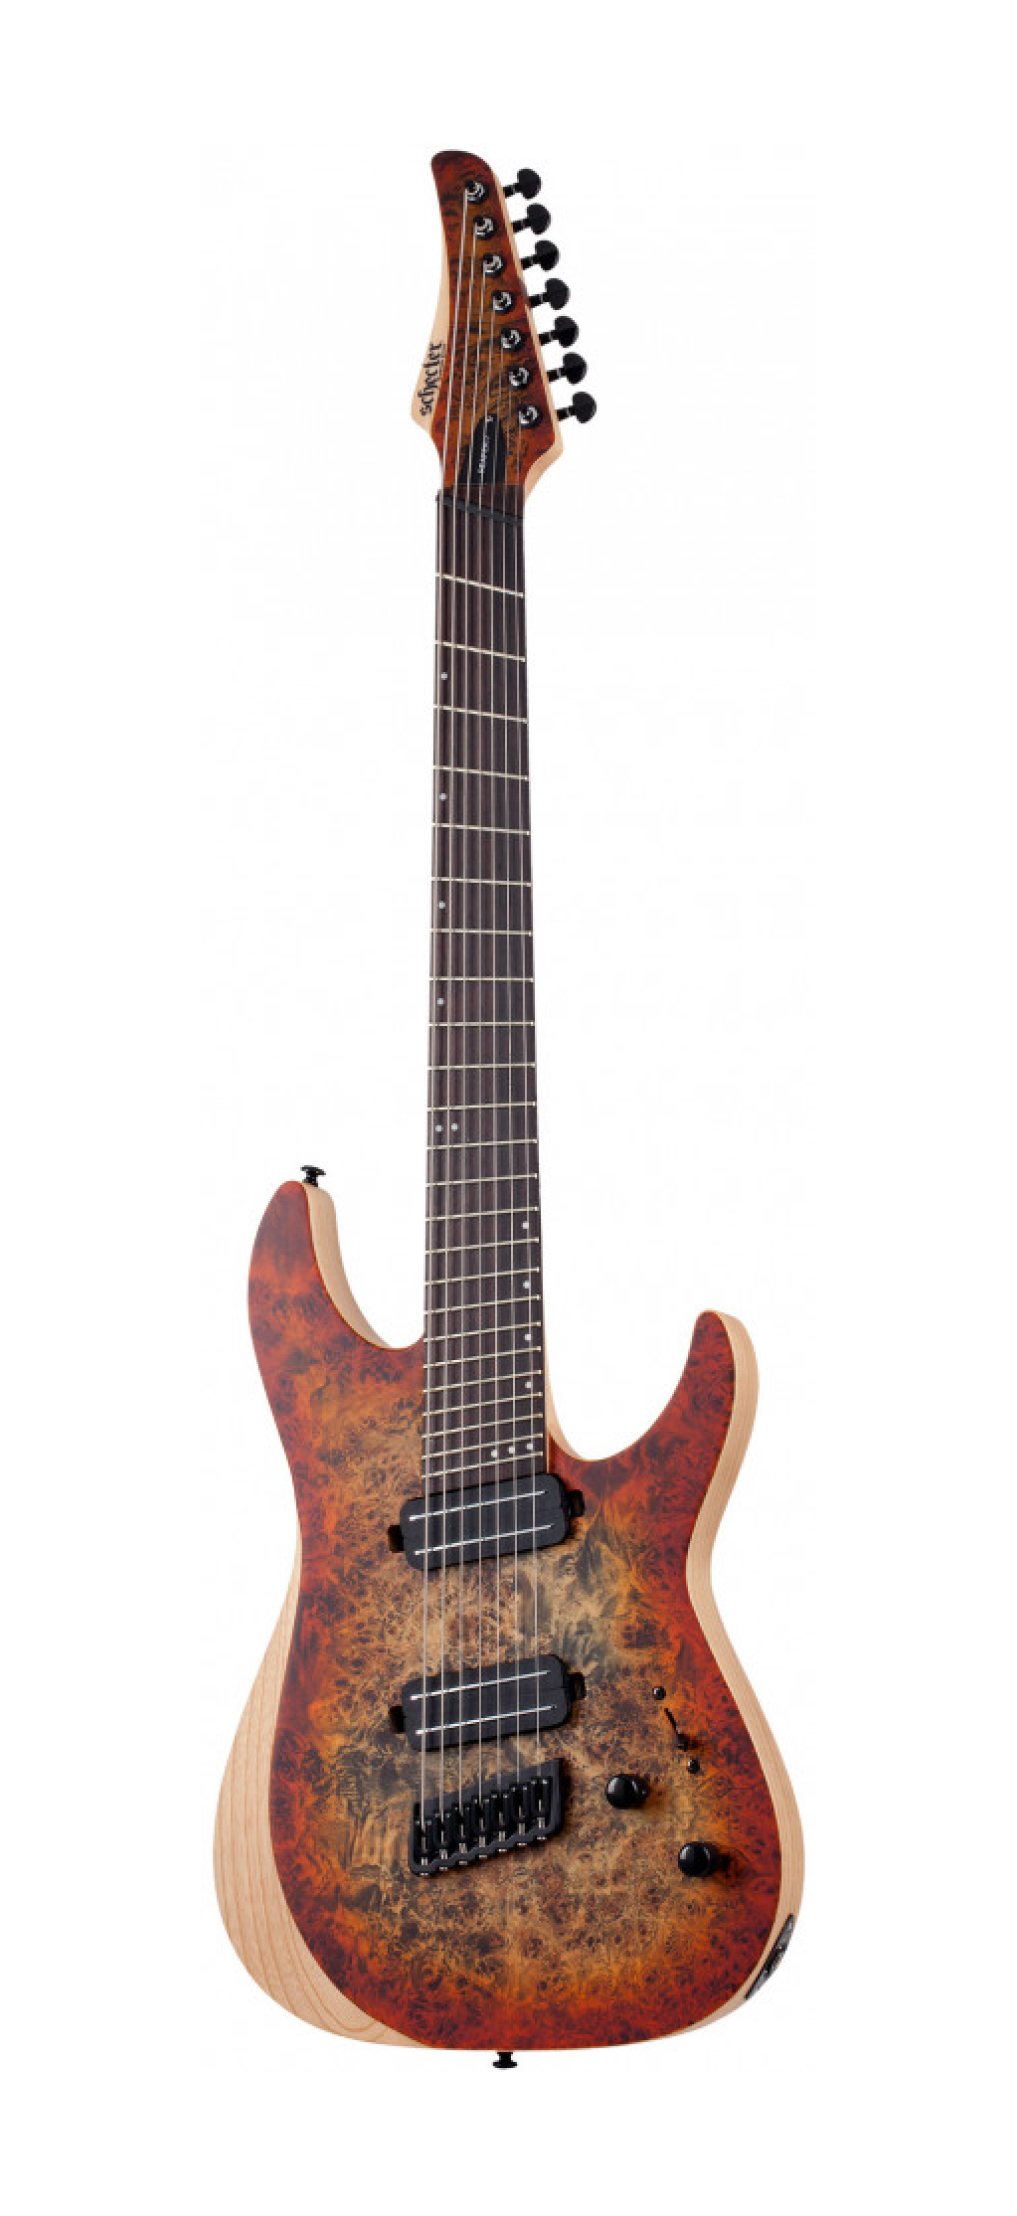 Электрогитары Schecter REAPER-7 Multiscale SIB parks van dyke clang of the yankee reaper